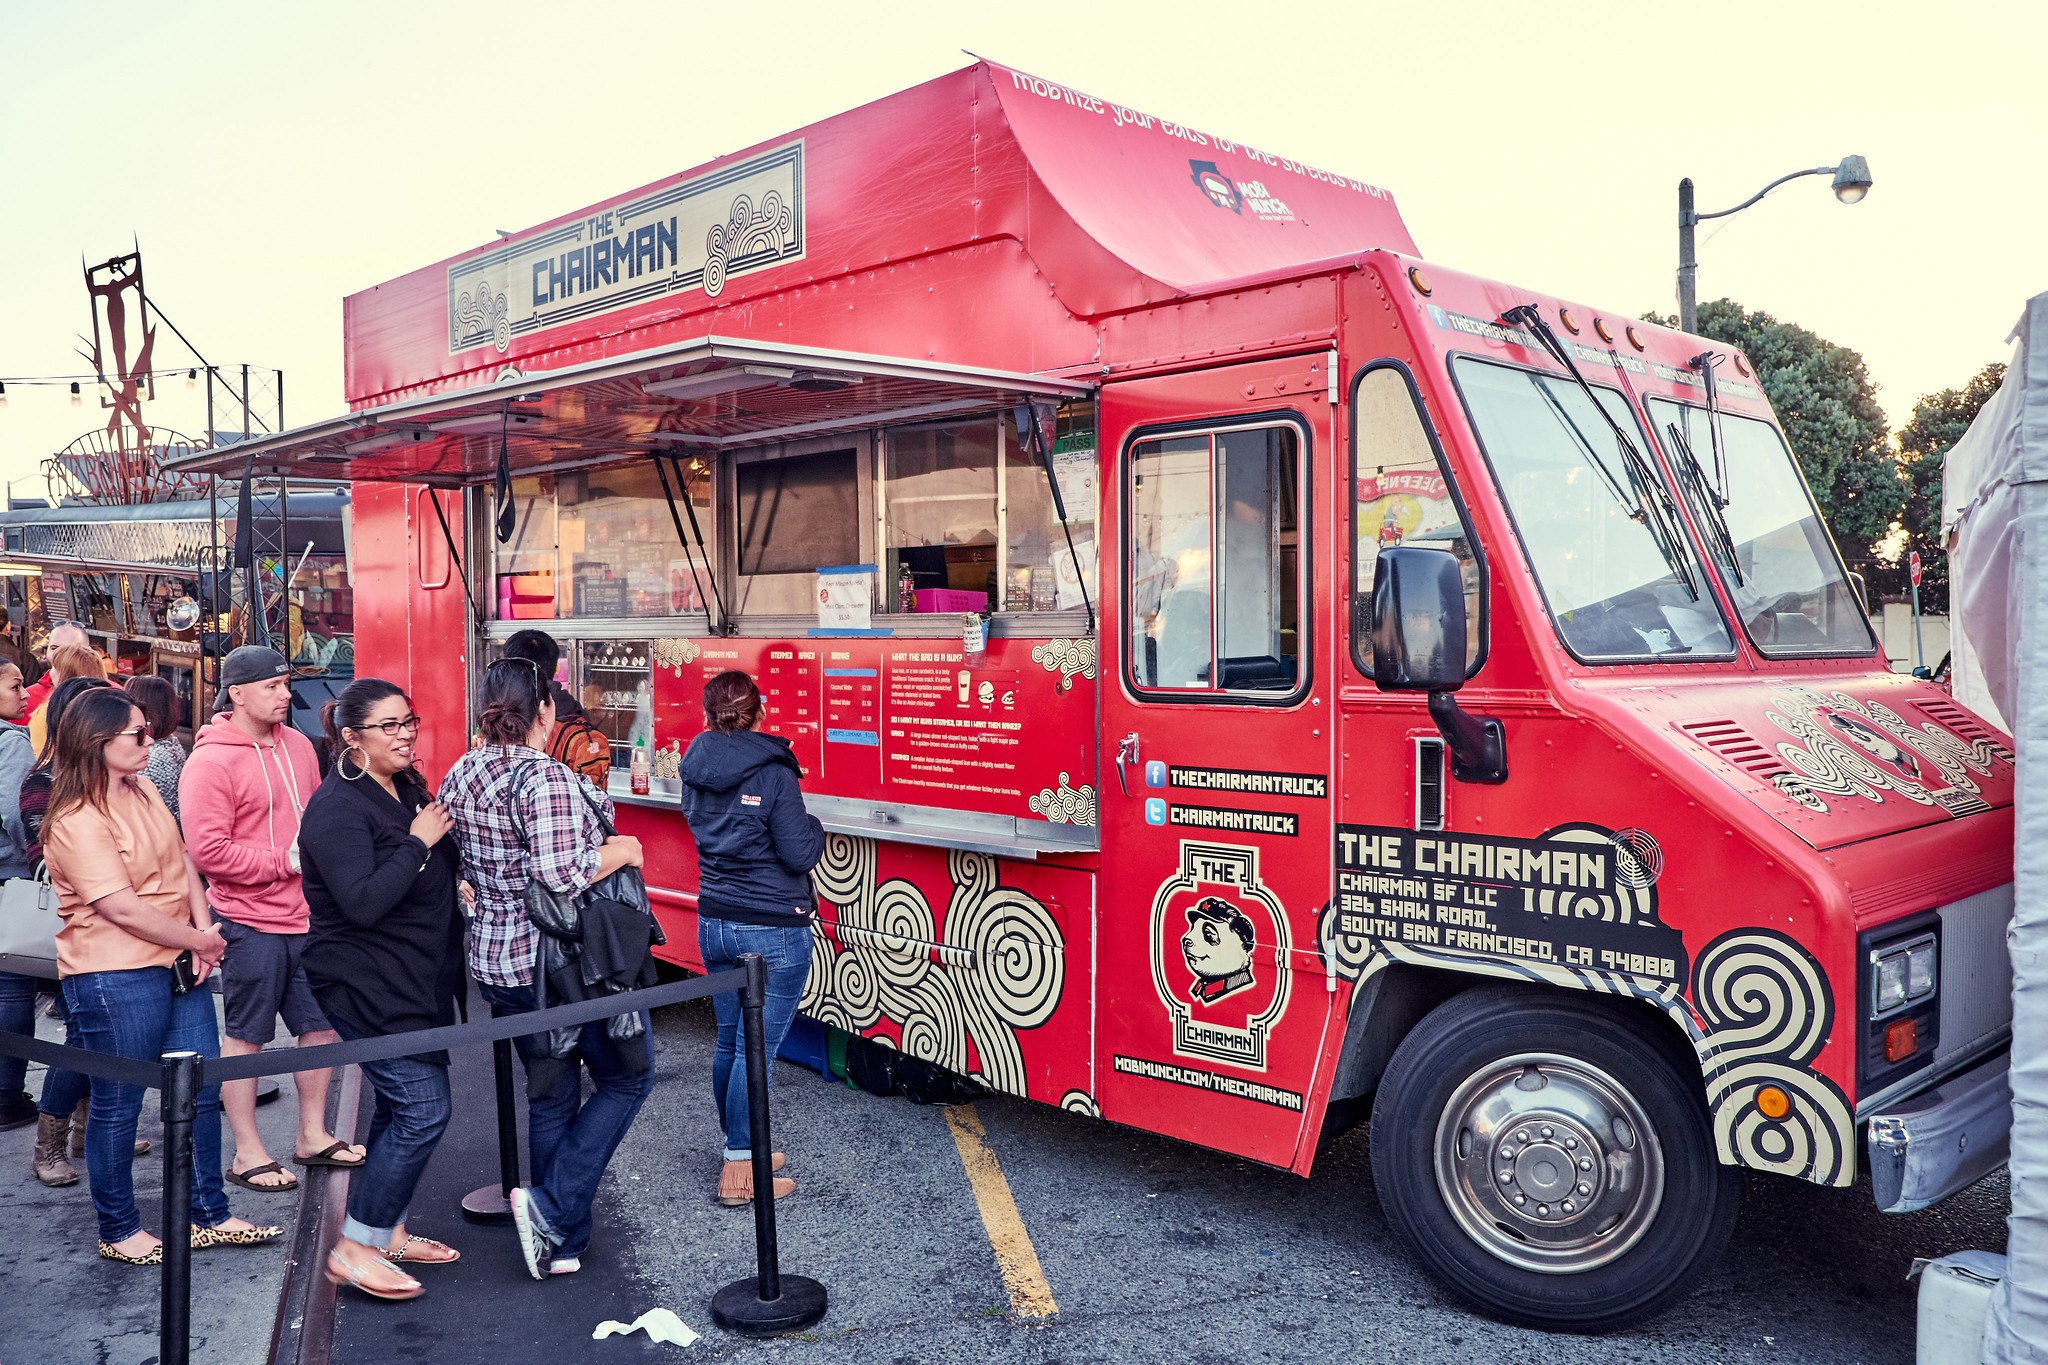 American Cuisine 10 San Francisco Best Food Trucks that You Have to Try